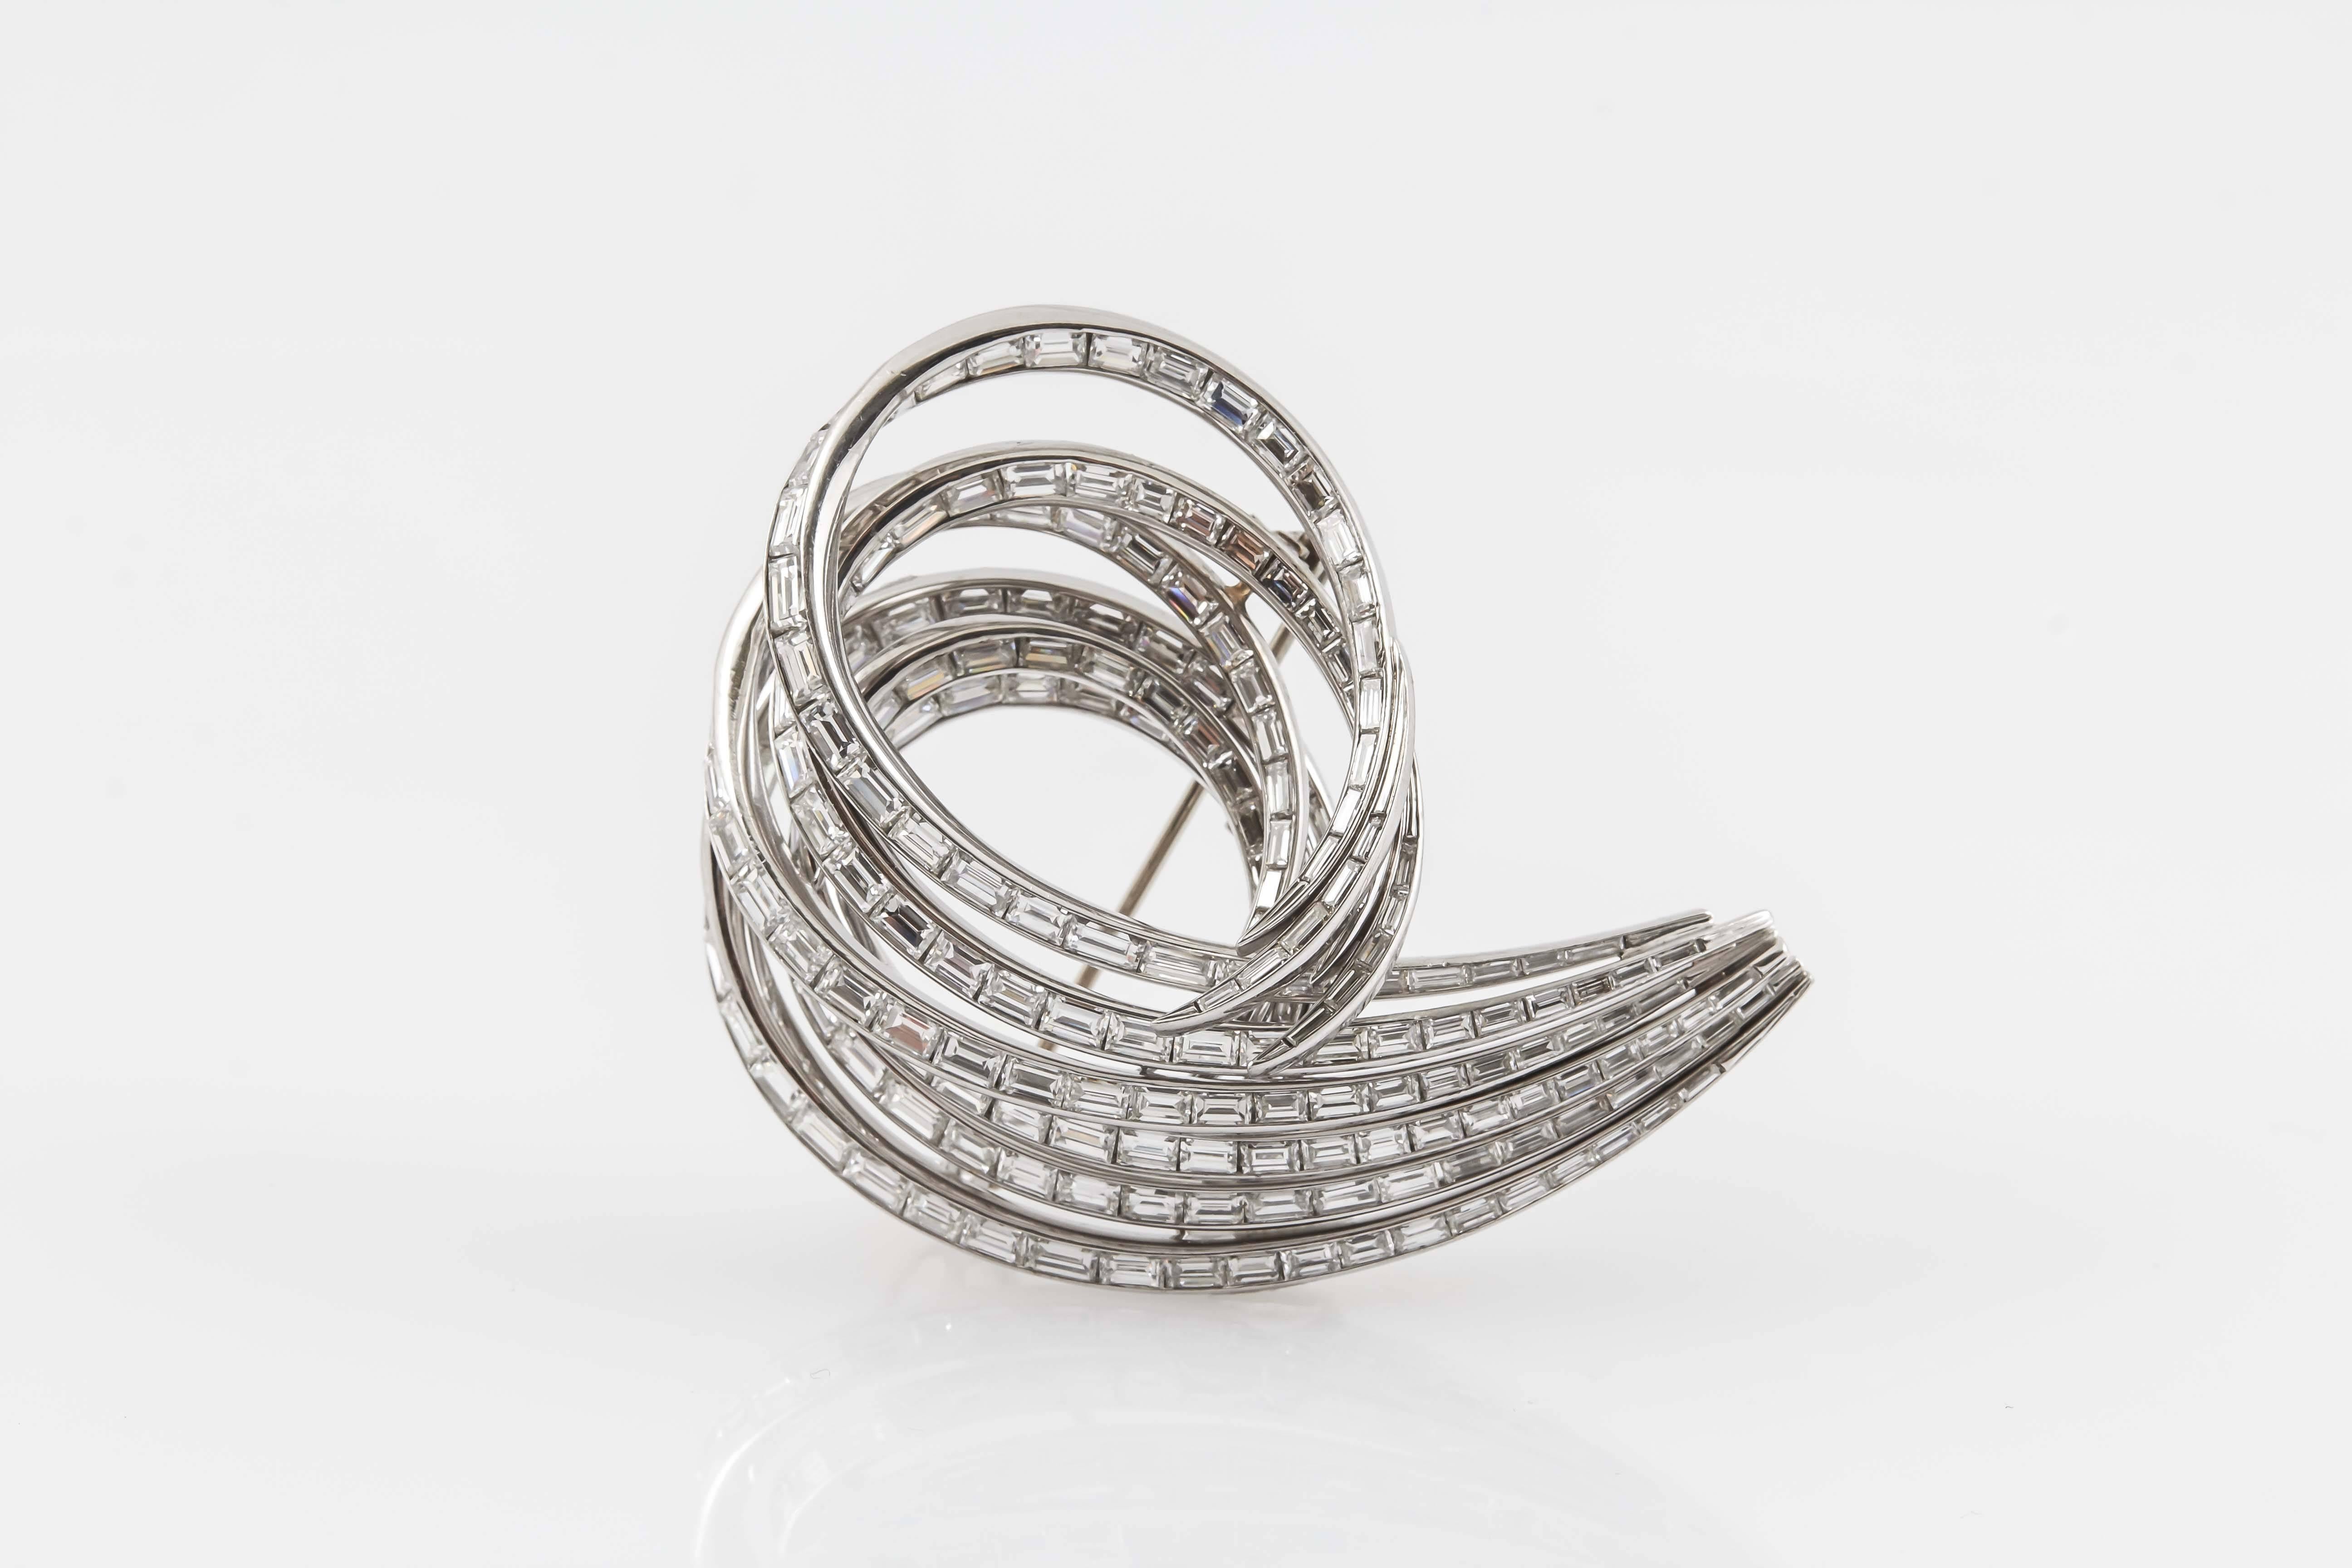 Diamond scroll brooch, set with different sized baguette-cut diamonds weighing a total of approximately 25.00 carats, mounted in platinum. 